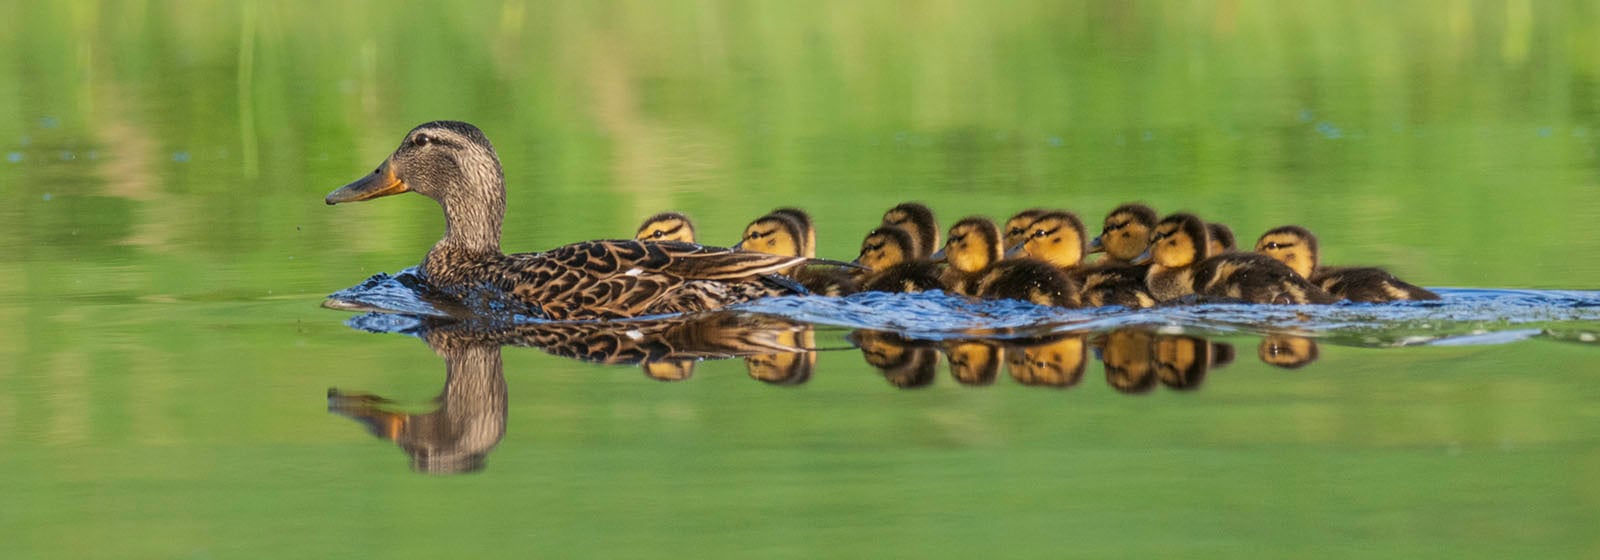 A mother duck leads a line of ducklings across a calm body of water. The water reflects the ducks' images, and the background is a blurry mix of green hues, indicating lush vegetation. The ducklings follow closely behind the mother in a single-file line.